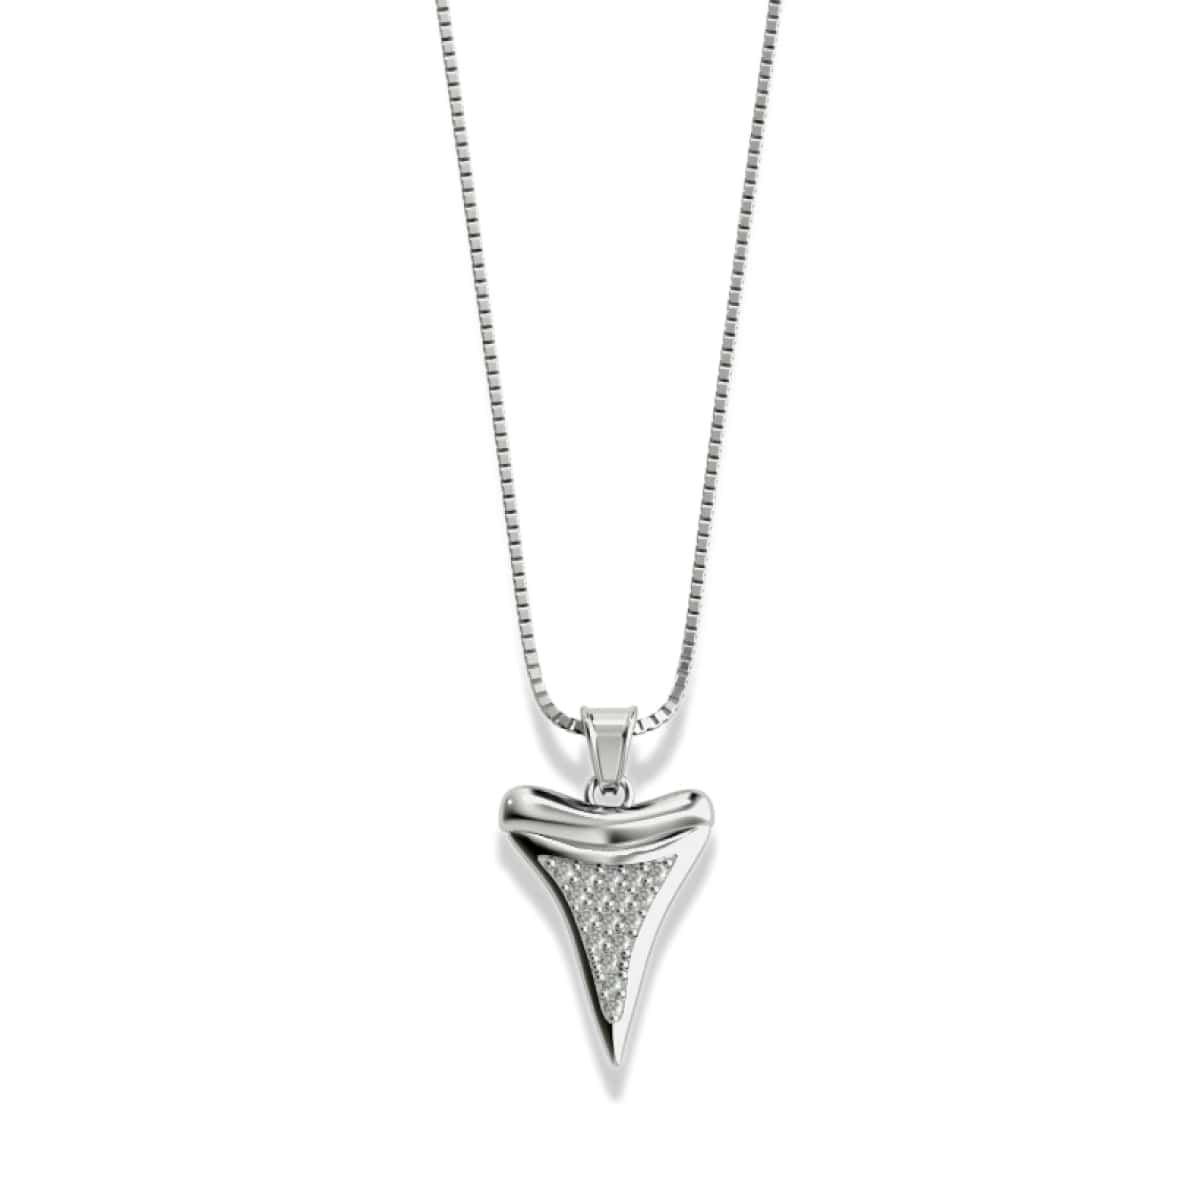 Detail Shark Tooth Mood Necklace Nomer 41